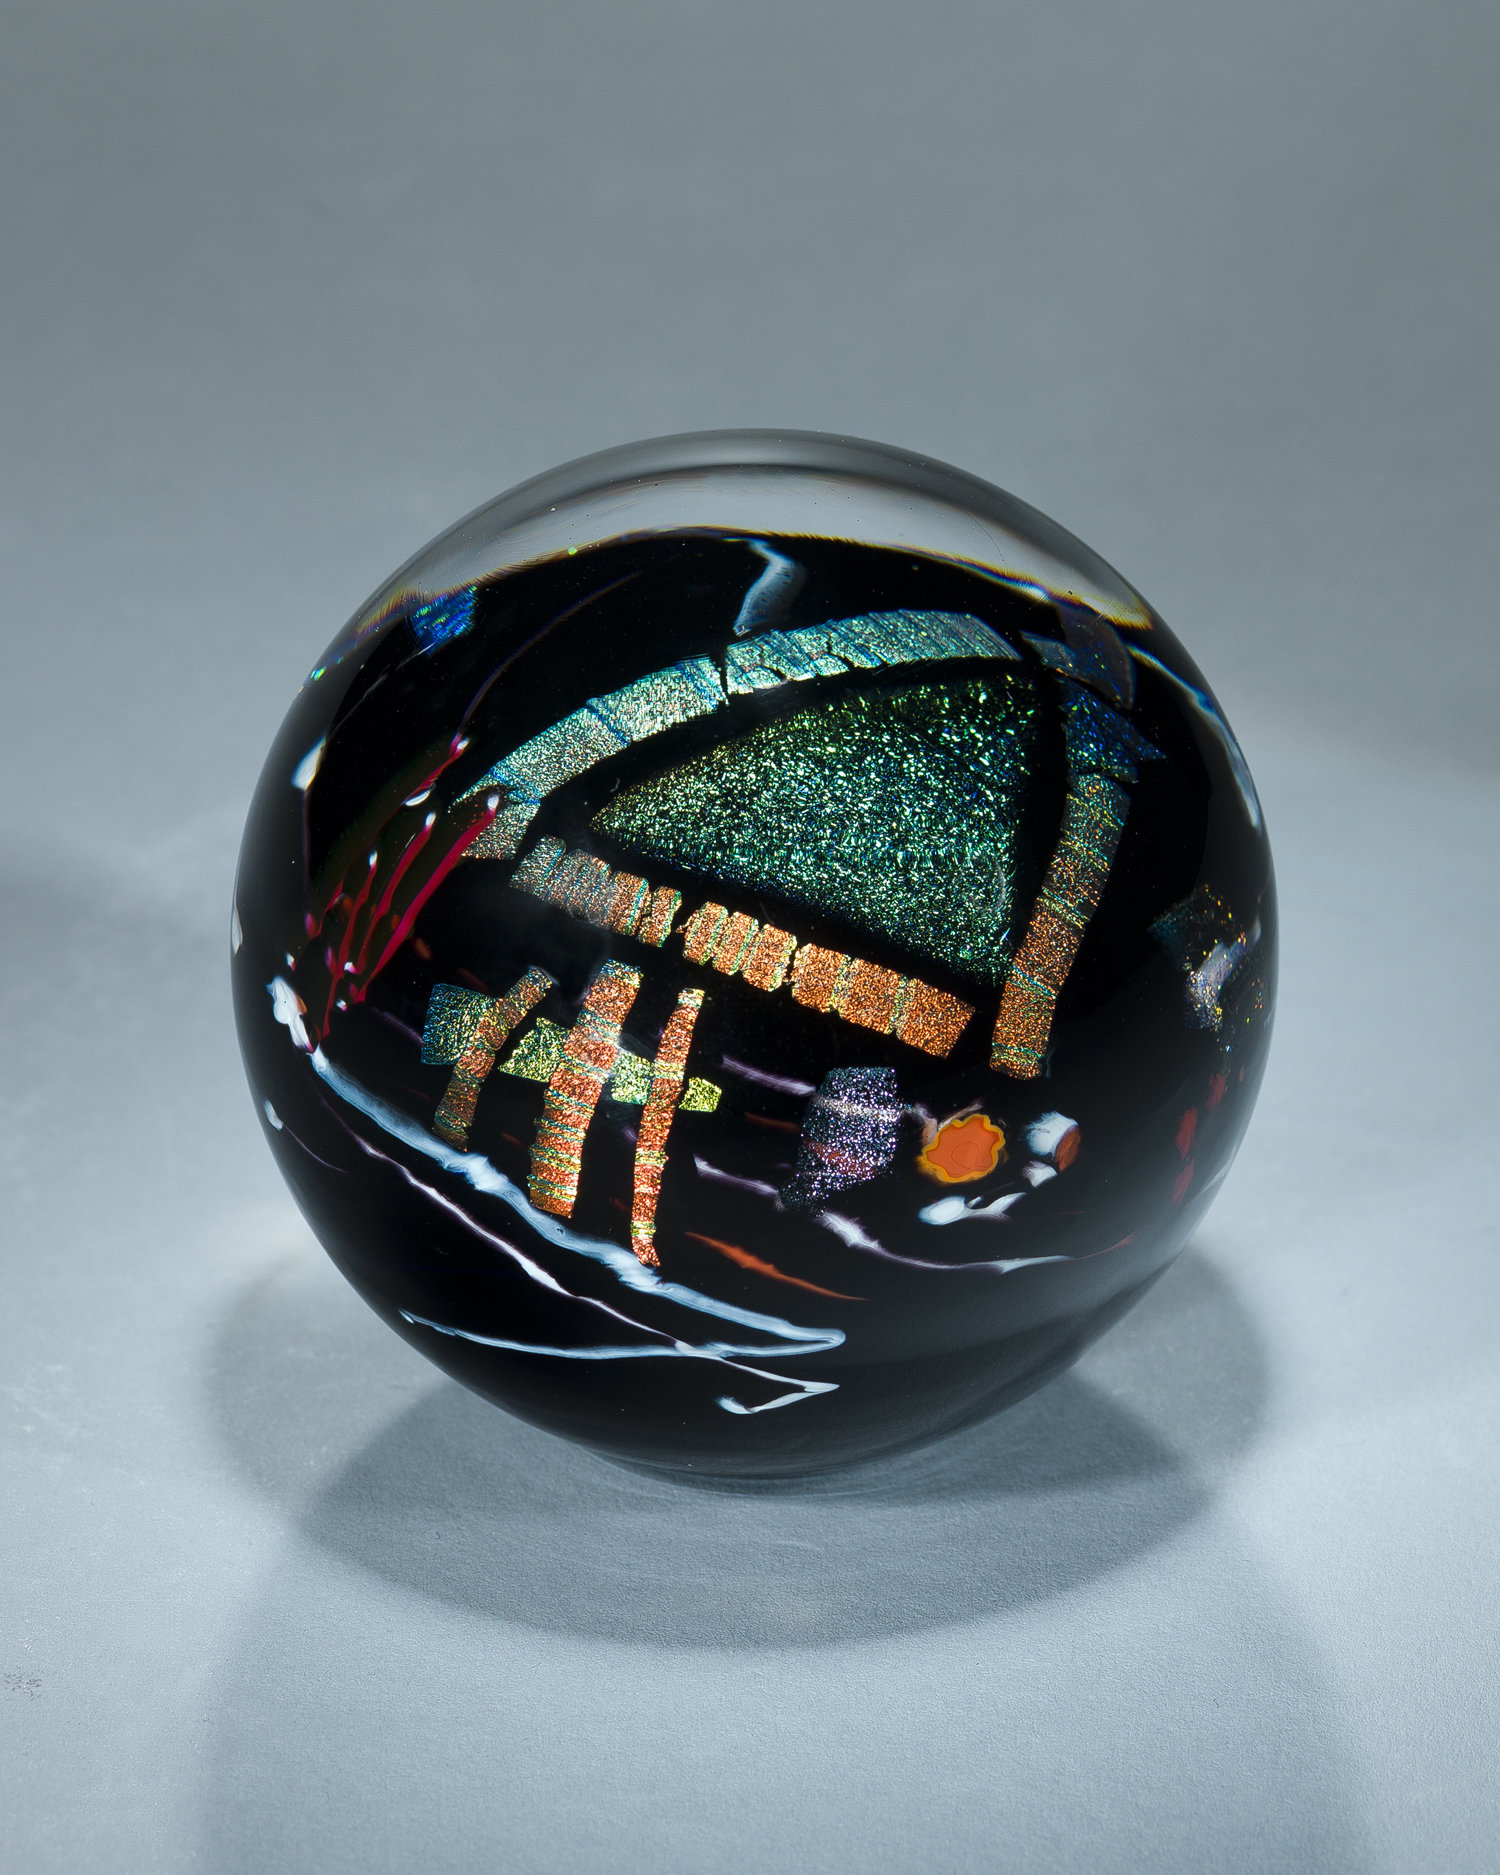 Black Graphic Evolution Series Paperweight By Shawn Messenger Art Glass Paperweight Artful Home